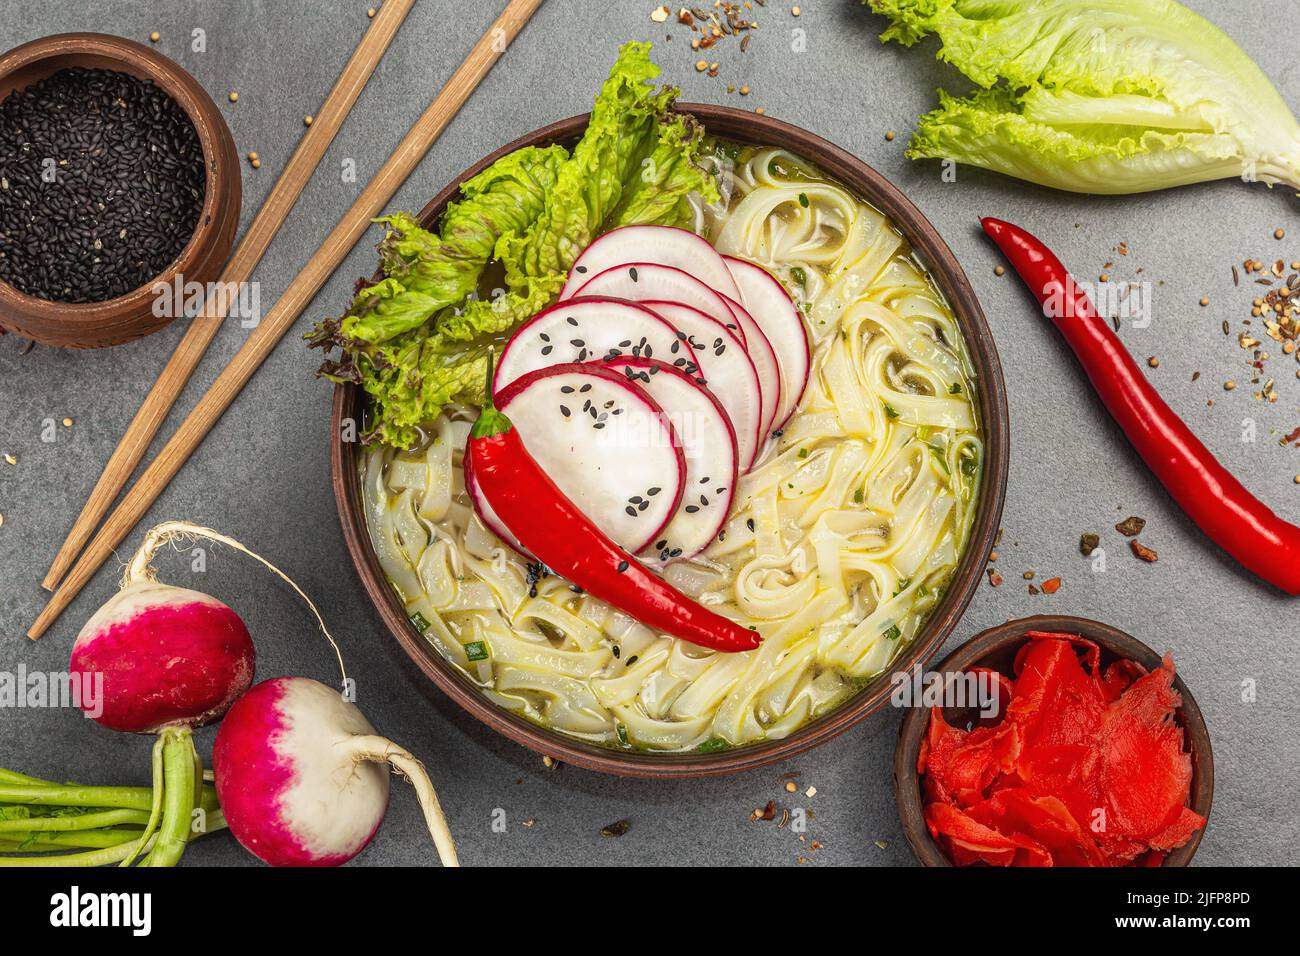 Hoto, Japanese Udon Noodles Hot Pot with Squash and Vegetables. Stock Photo  - Image of cuisine, radish: 230912058